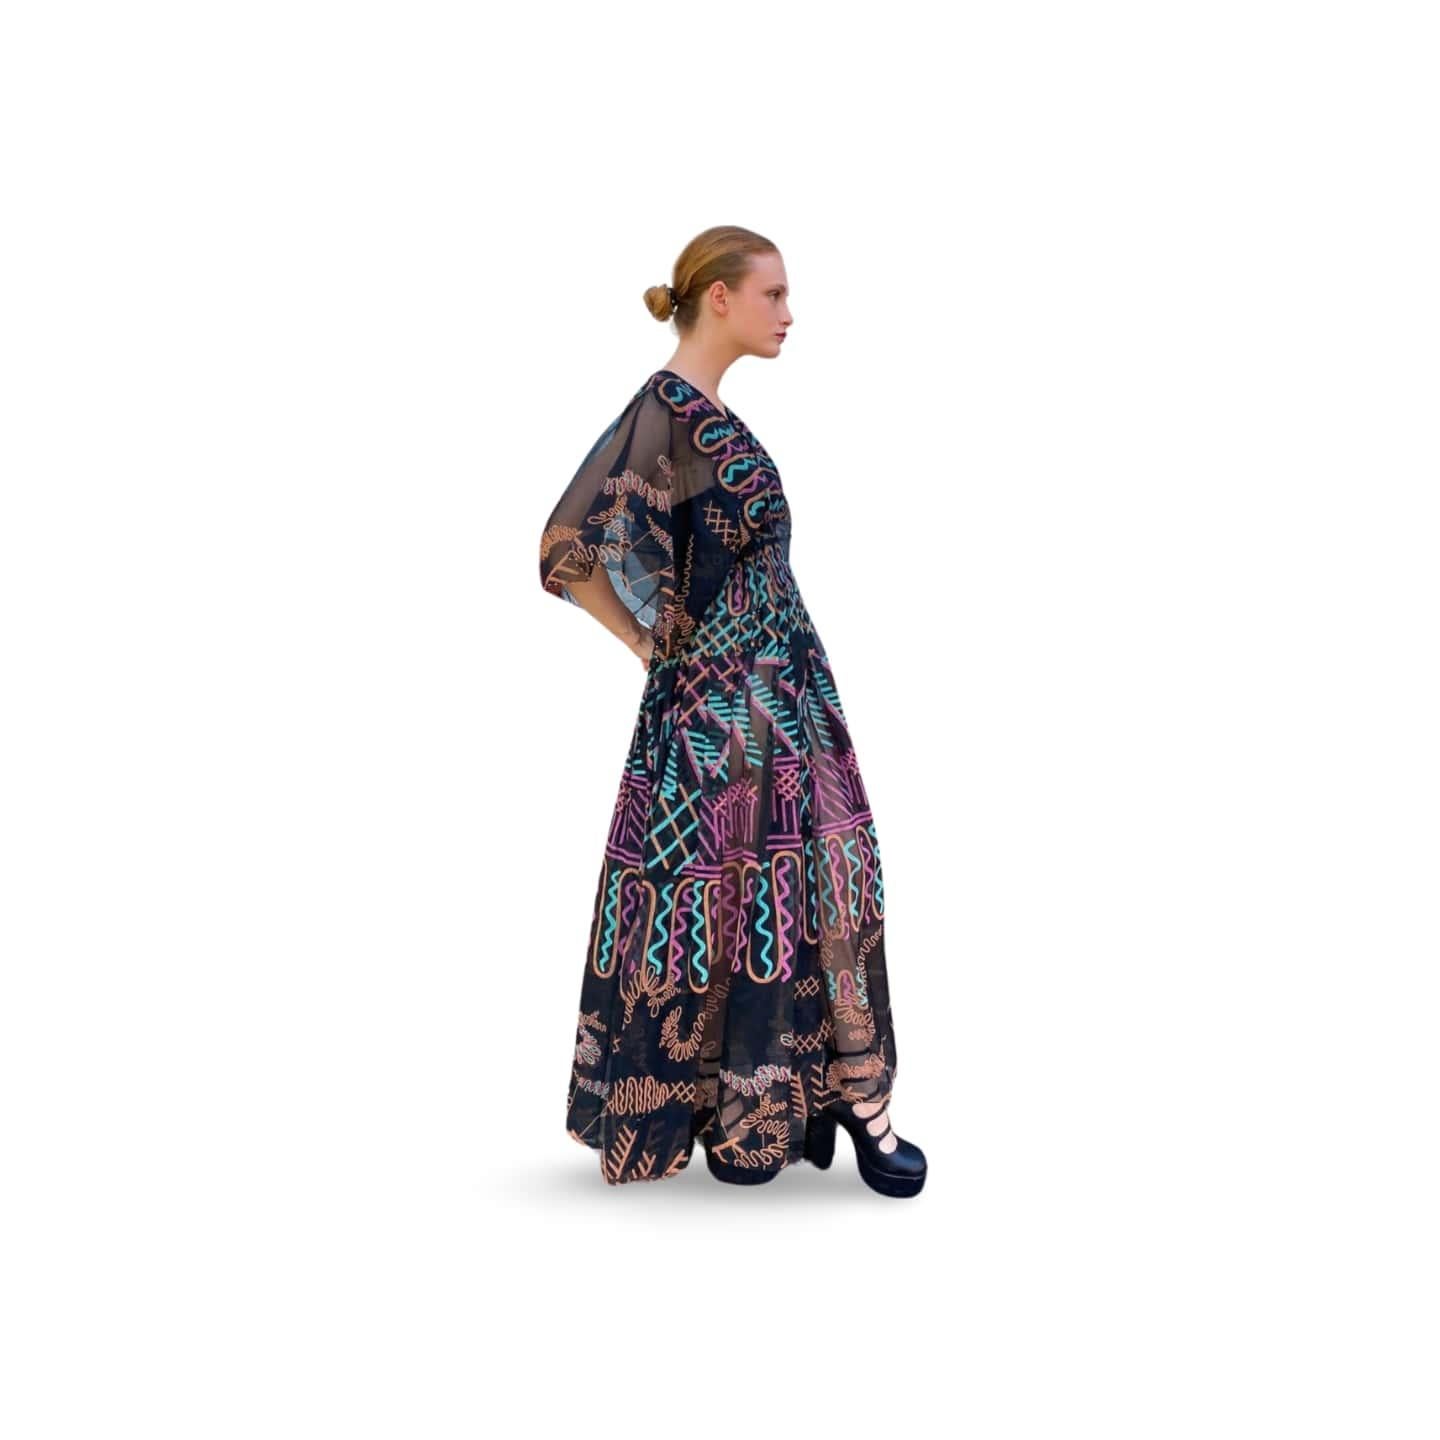 Zandra Rhodes Documented 1976 Landscape Print Dress In Excellent Condition For Sale In Los Angeles, CA